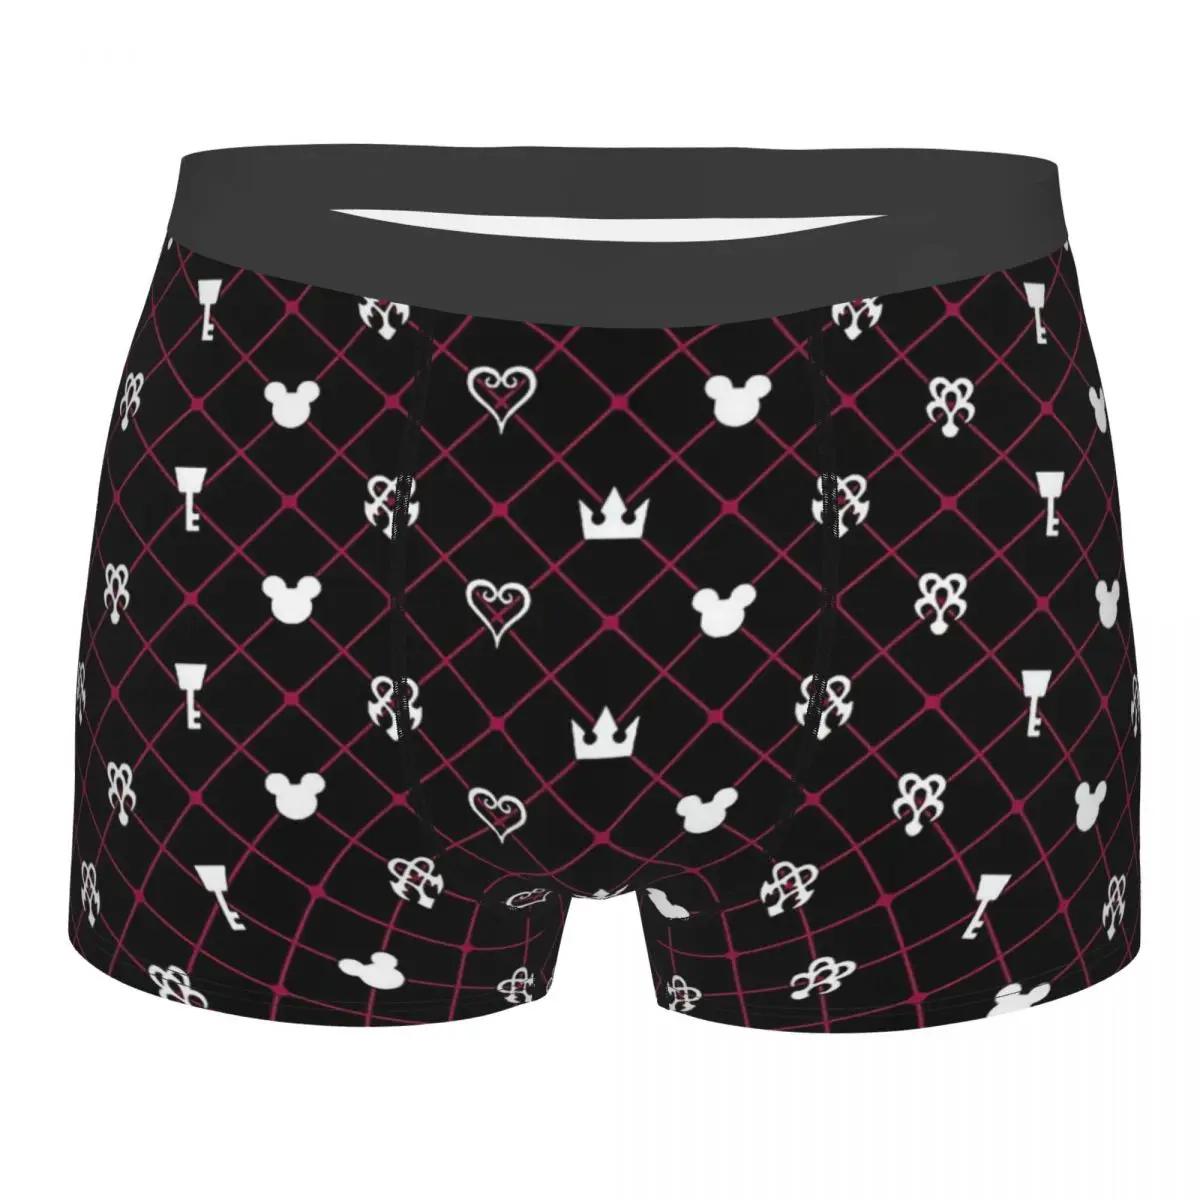 

Dream Drop Distance Men Boxer Briefs Underpants Kingdom Hearts Highly Breathable Top Quality Sexy Shorts Gift Idea